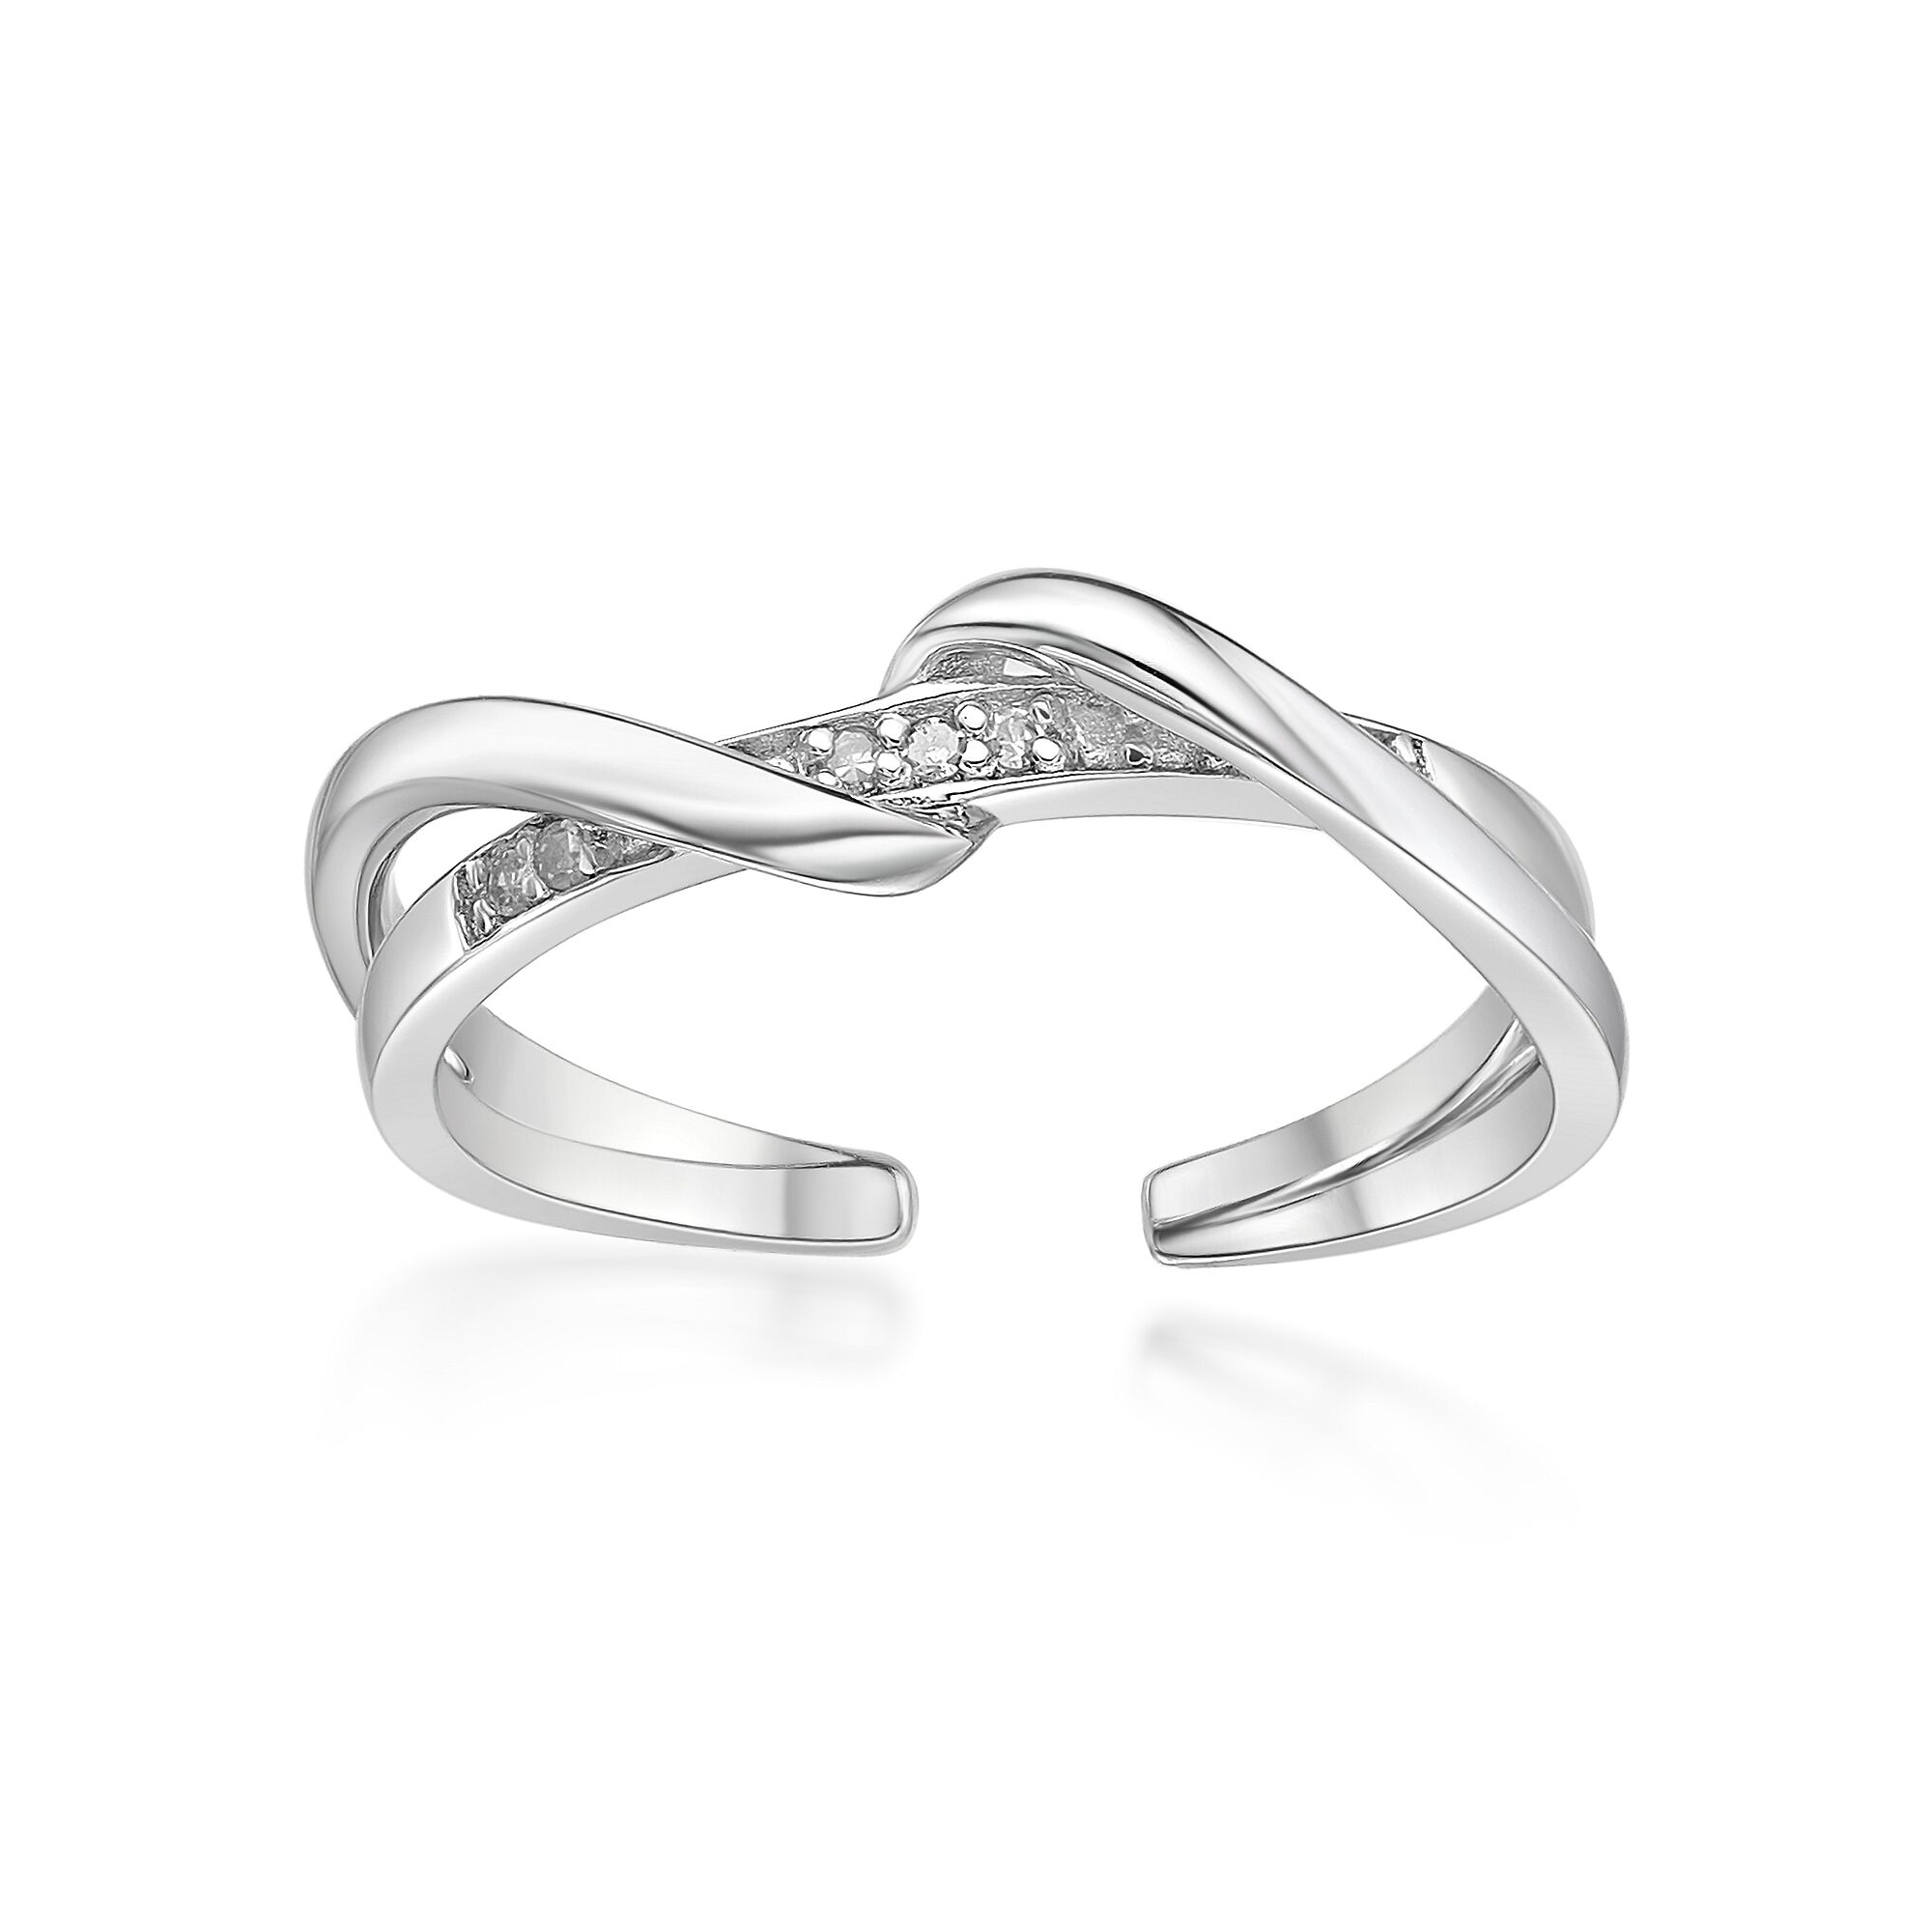 Lavari Jewelers Women's Dual Twisted Adjustable Toe Ring, 925 Sterling Silver, .035 Cttw